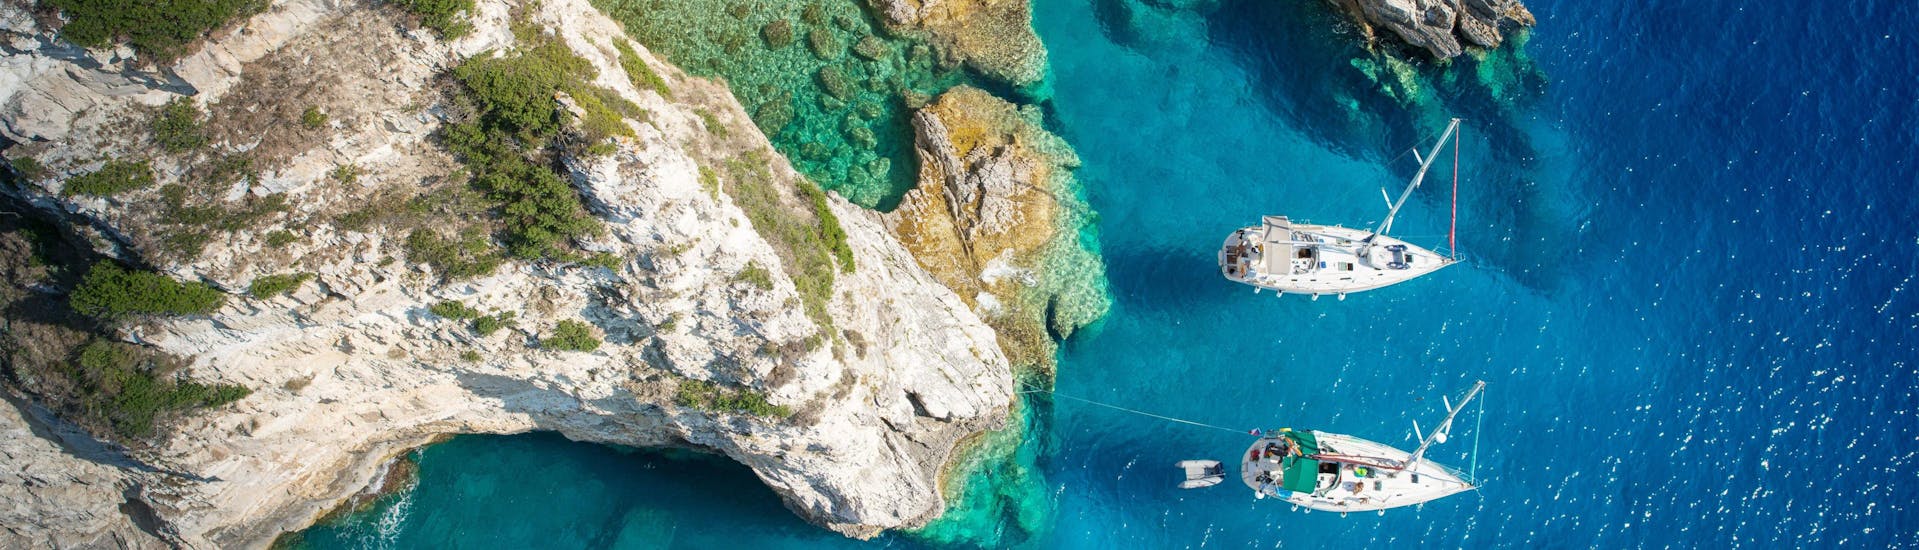 Aerial view of a cove near the blue lagoon beach where boats are moored, a population destination in Greece for boat trips.